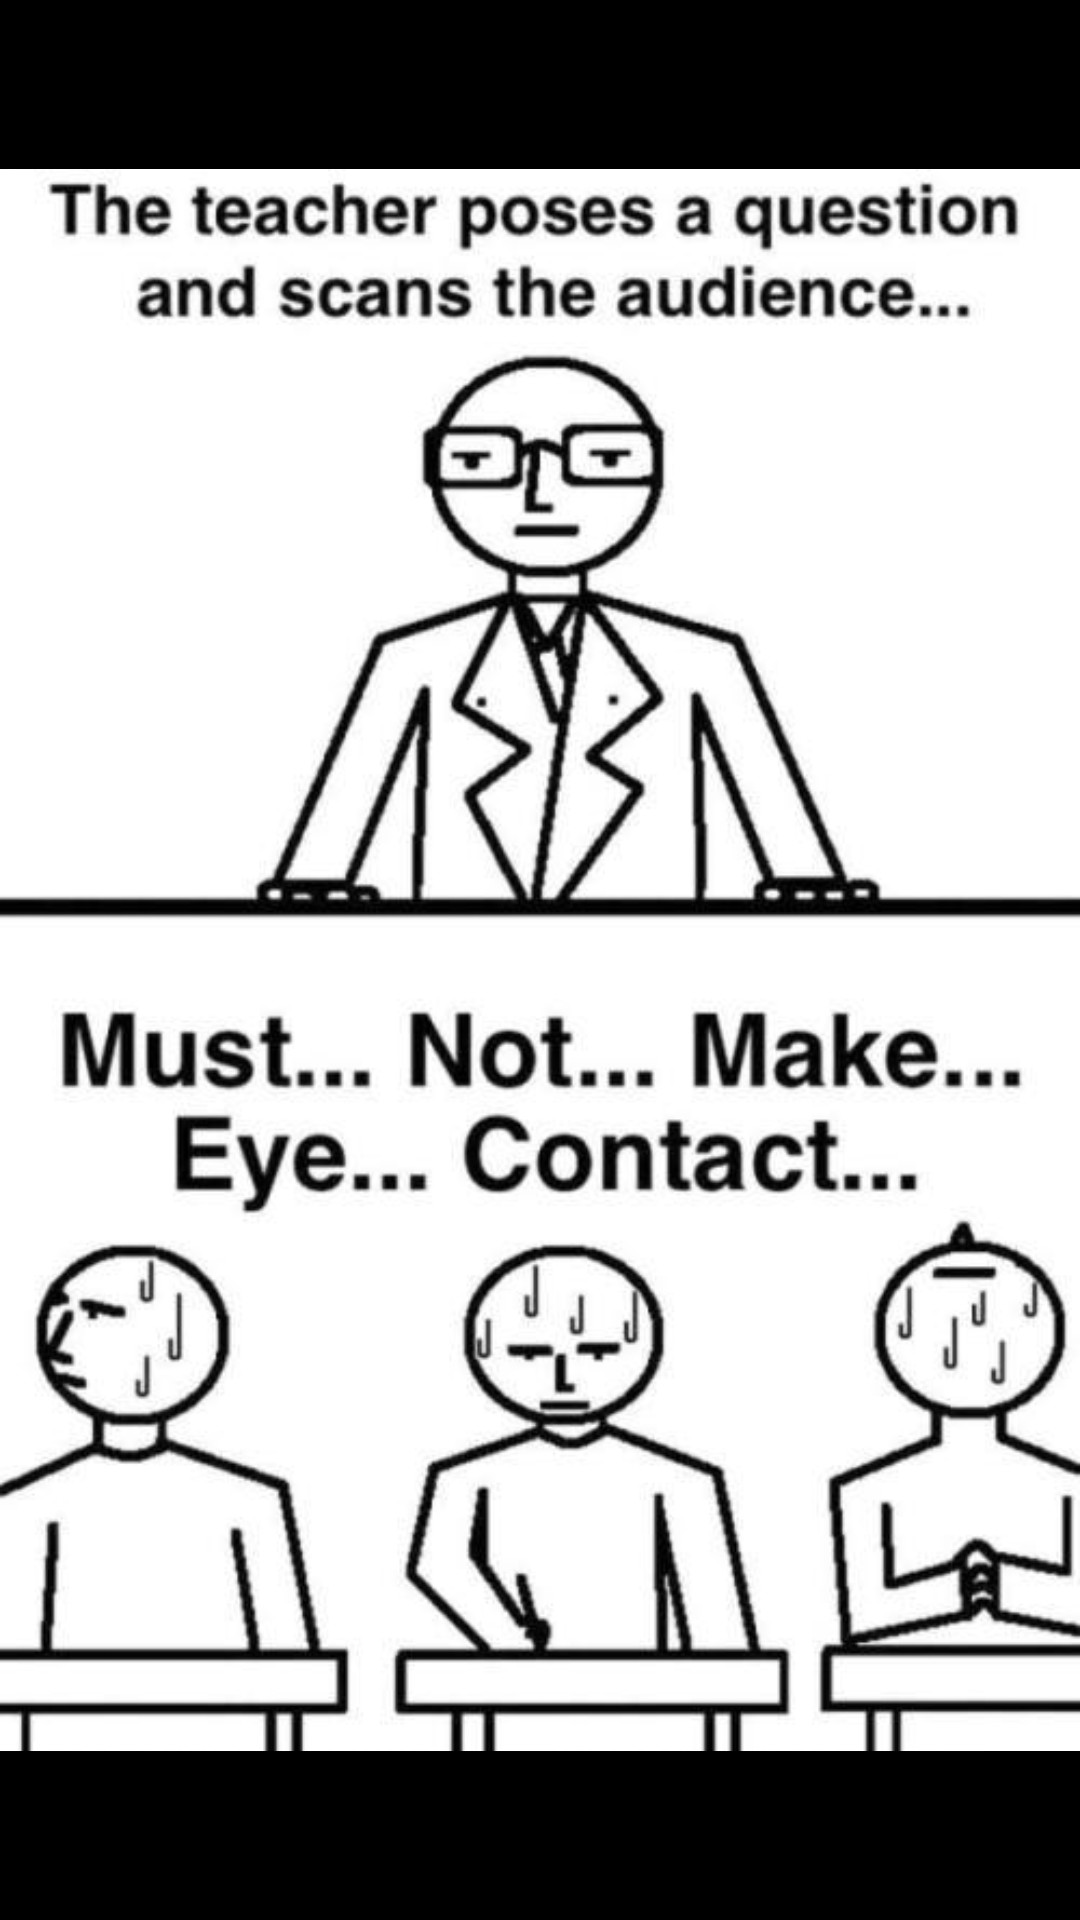 See what happens when you make eye contact. - meme